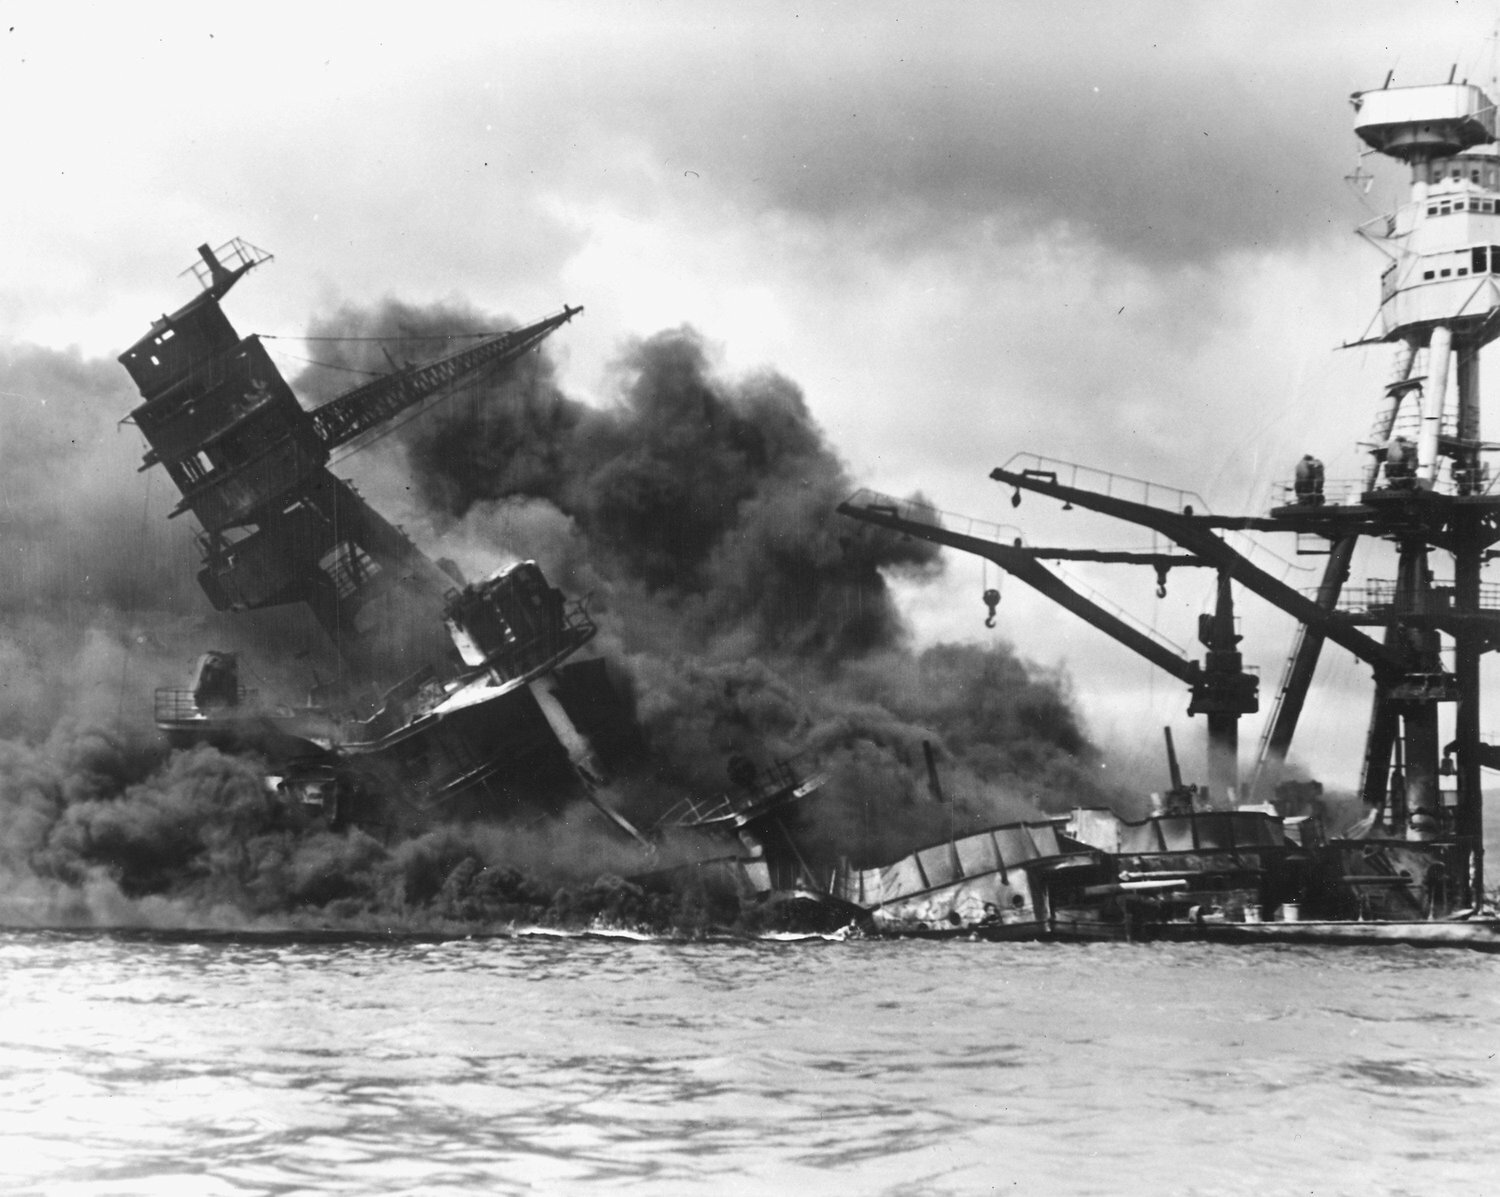 The battleship USS Arizona sinks after being hit by a Japanese air attack on Pearl Harbor, Hawaii, December 7, 1941. Picture taken December 7, 1941.